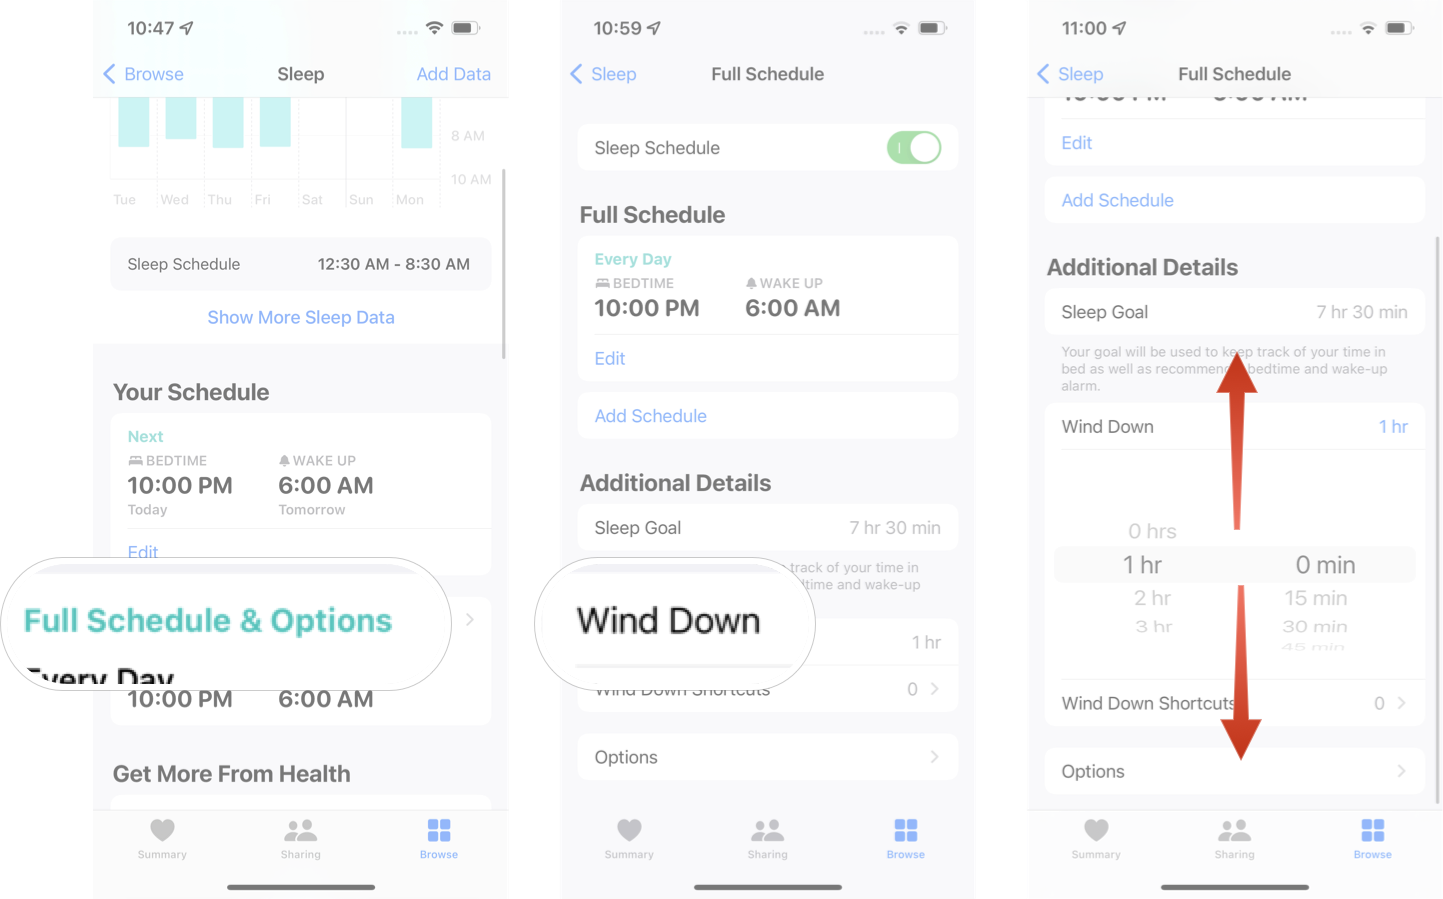 Editing Wind Down In iOS 15: Tap full schedule & options, tap wind down, and then adjust the amount of time.